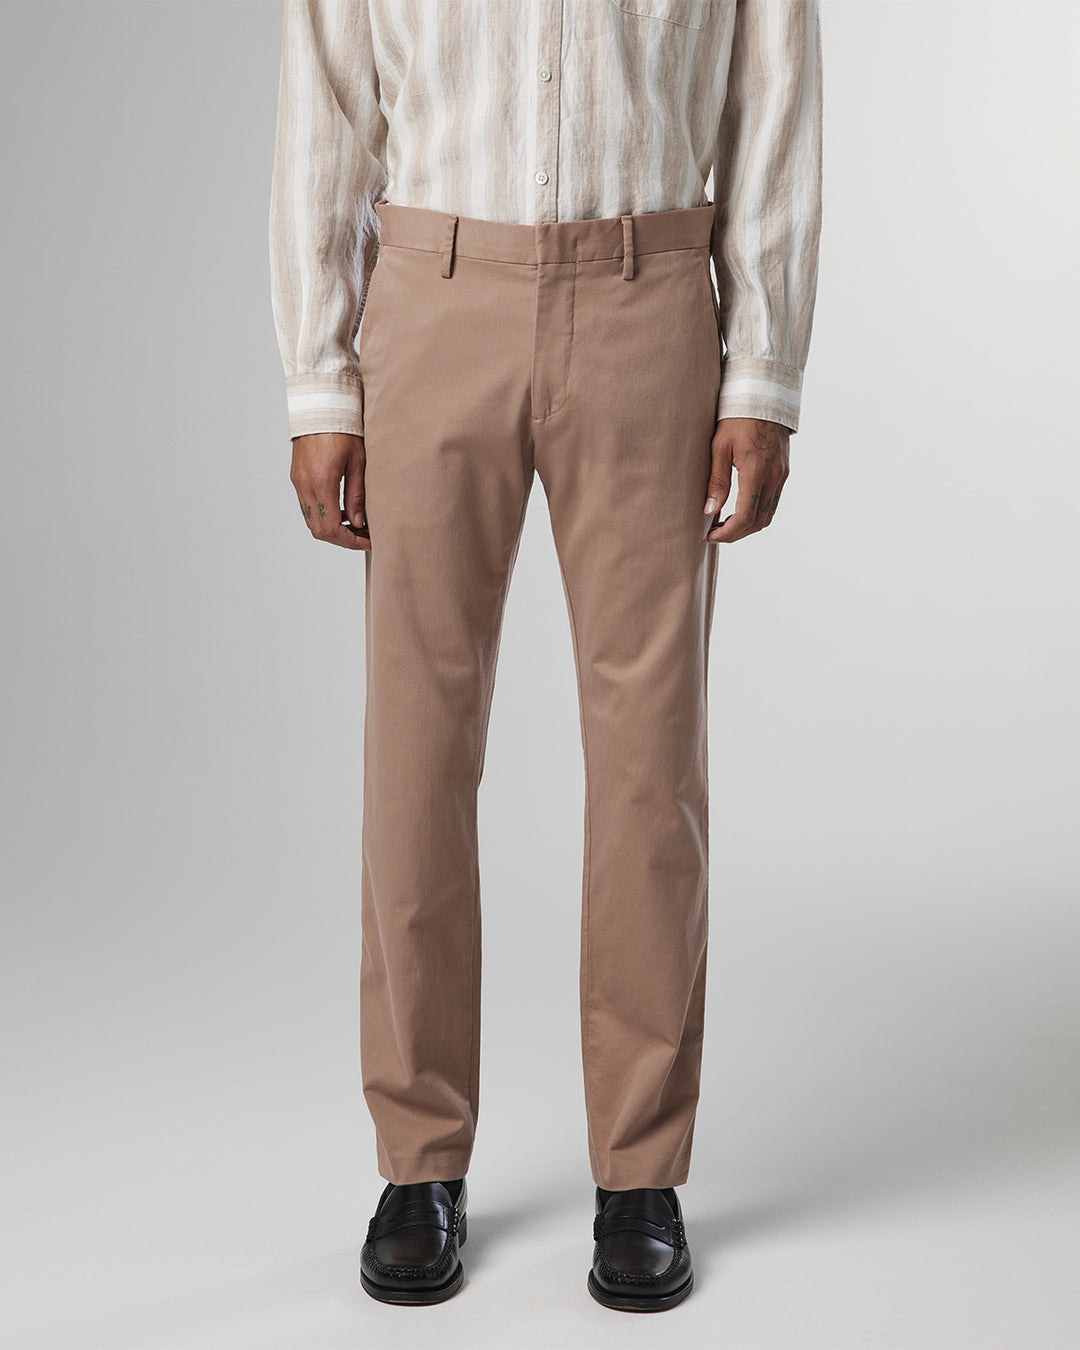 NN07 - Theo 1420 Pant in Nougat | Buster McGee